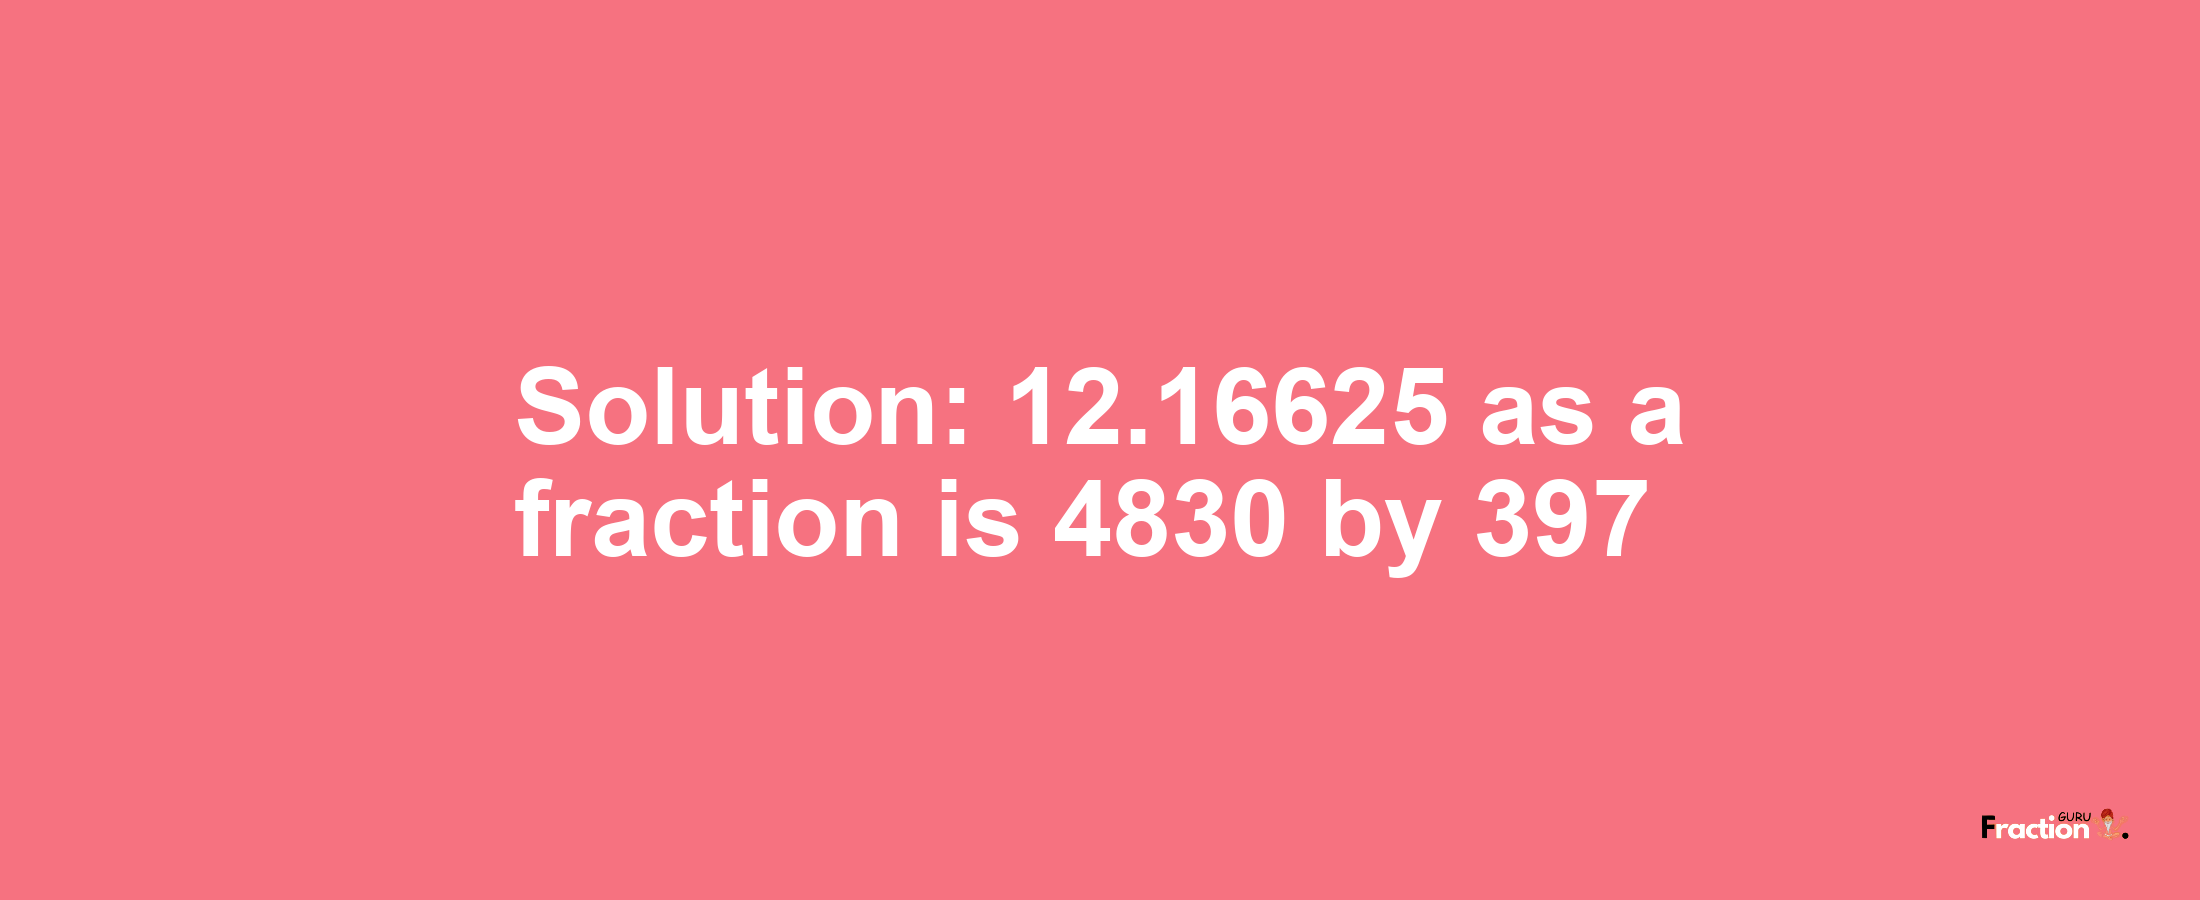 Solution:12.16625 as a fraction is 4830/397